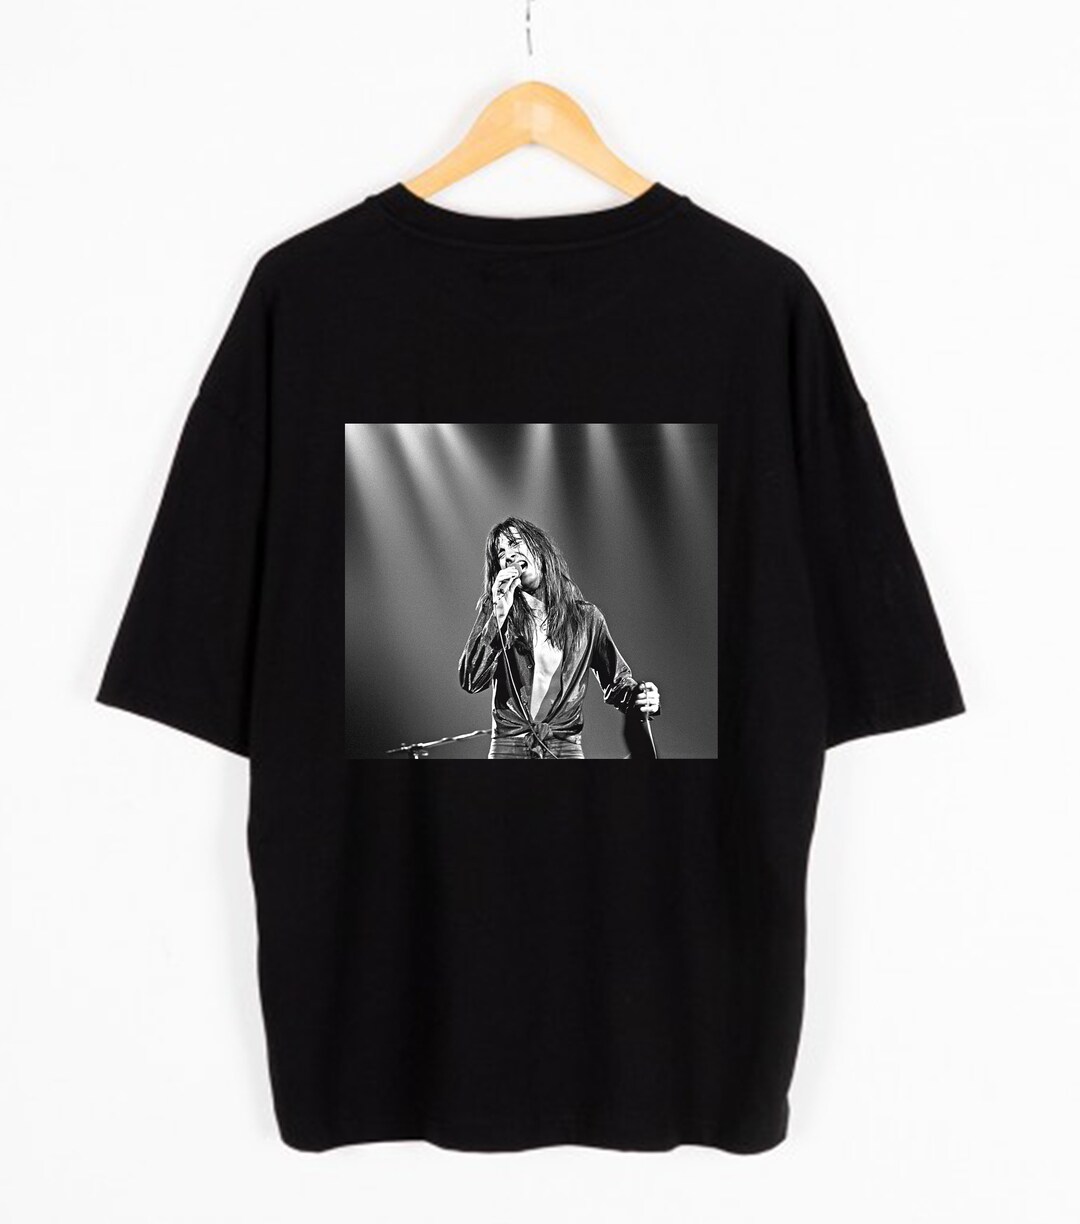 Steve Perry İmage T-shirt Design Downloadable File. for T-shirt ...